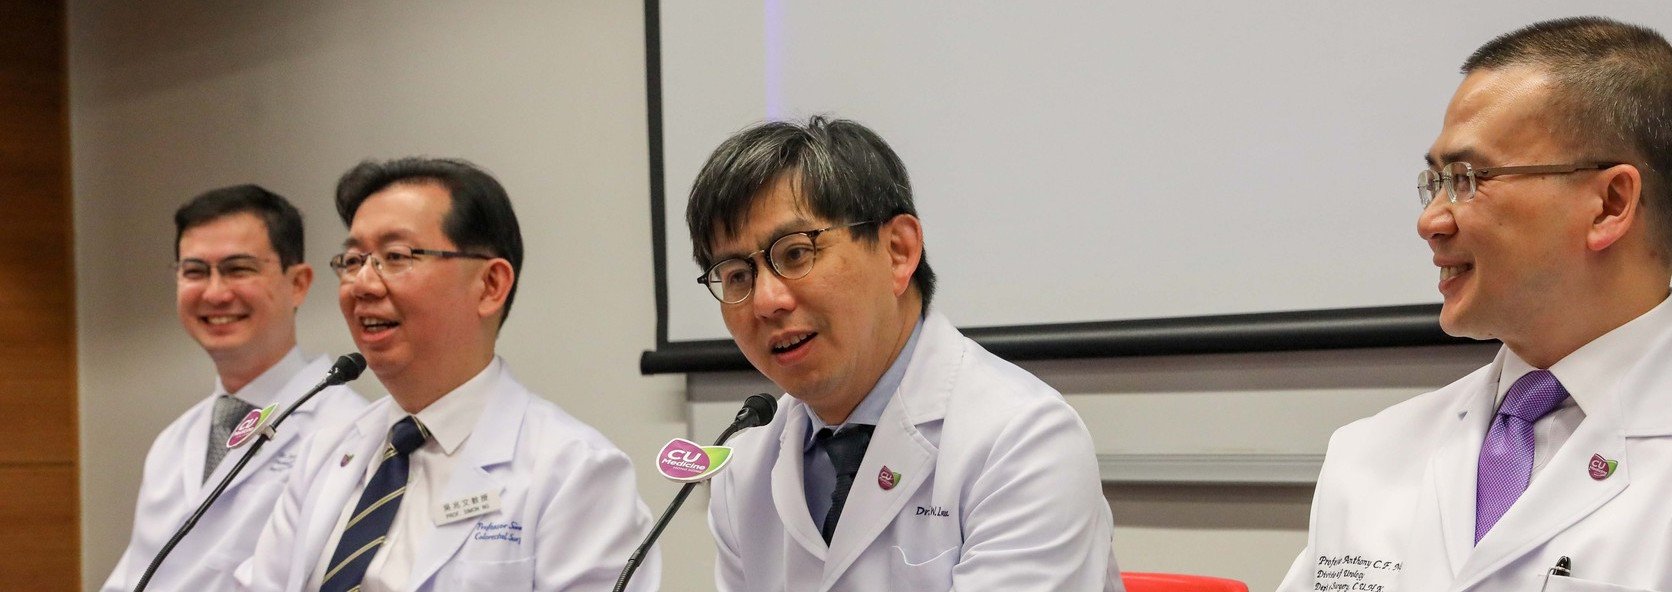 (Second from right) Professor James LAU, Chairman of the Department of Surgery, Faculty of Medicine at CUHK, points out that the clinical trial results provided valuable data for the introduction of the single port surgical robotic system for clinical use.